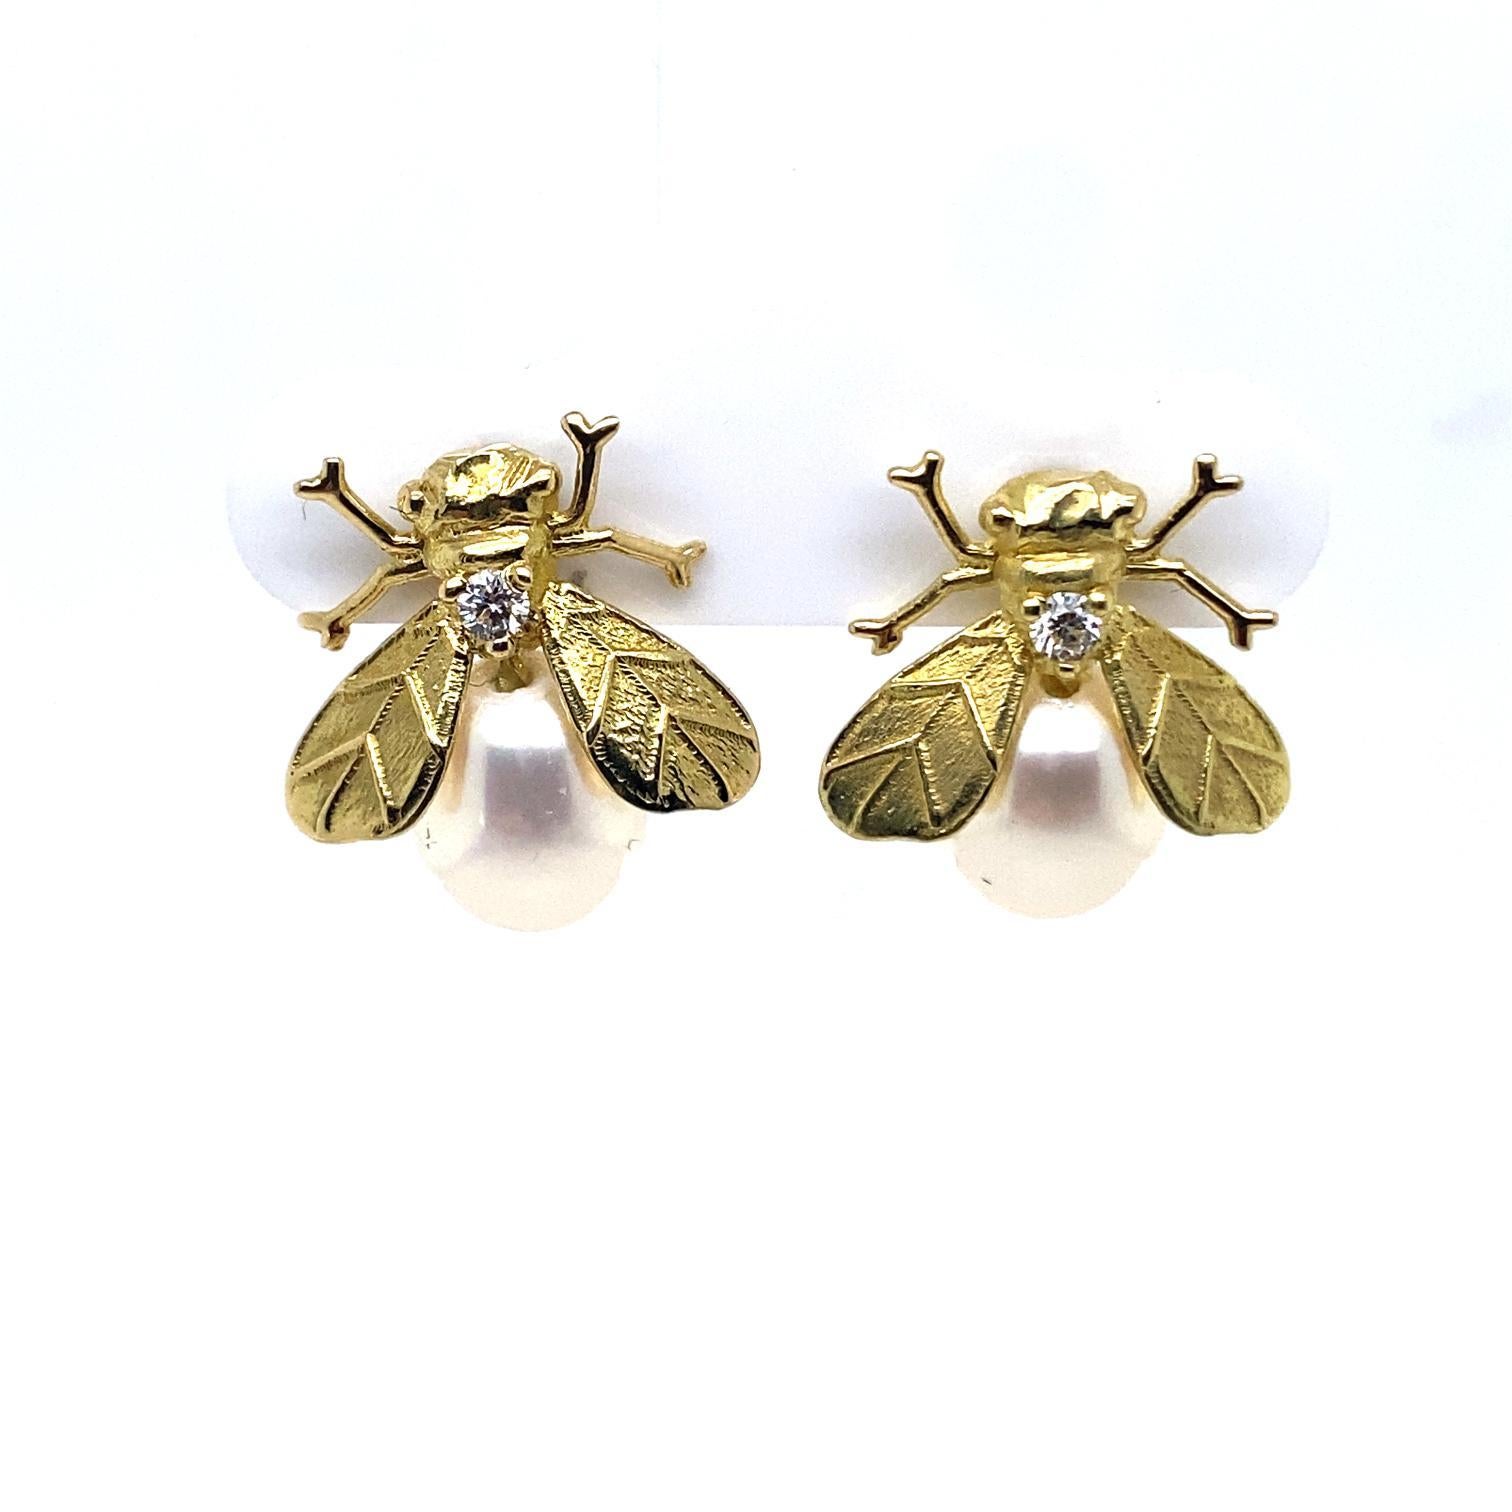 A pair of vintage bee stud pearl and diamond earrings set in 18 karat yellow gold. Circa 2000

The earrings are designed in yellow gold, each set to the thorax with a single round brilliant cut diamond for a total of 0.07 carats approximately